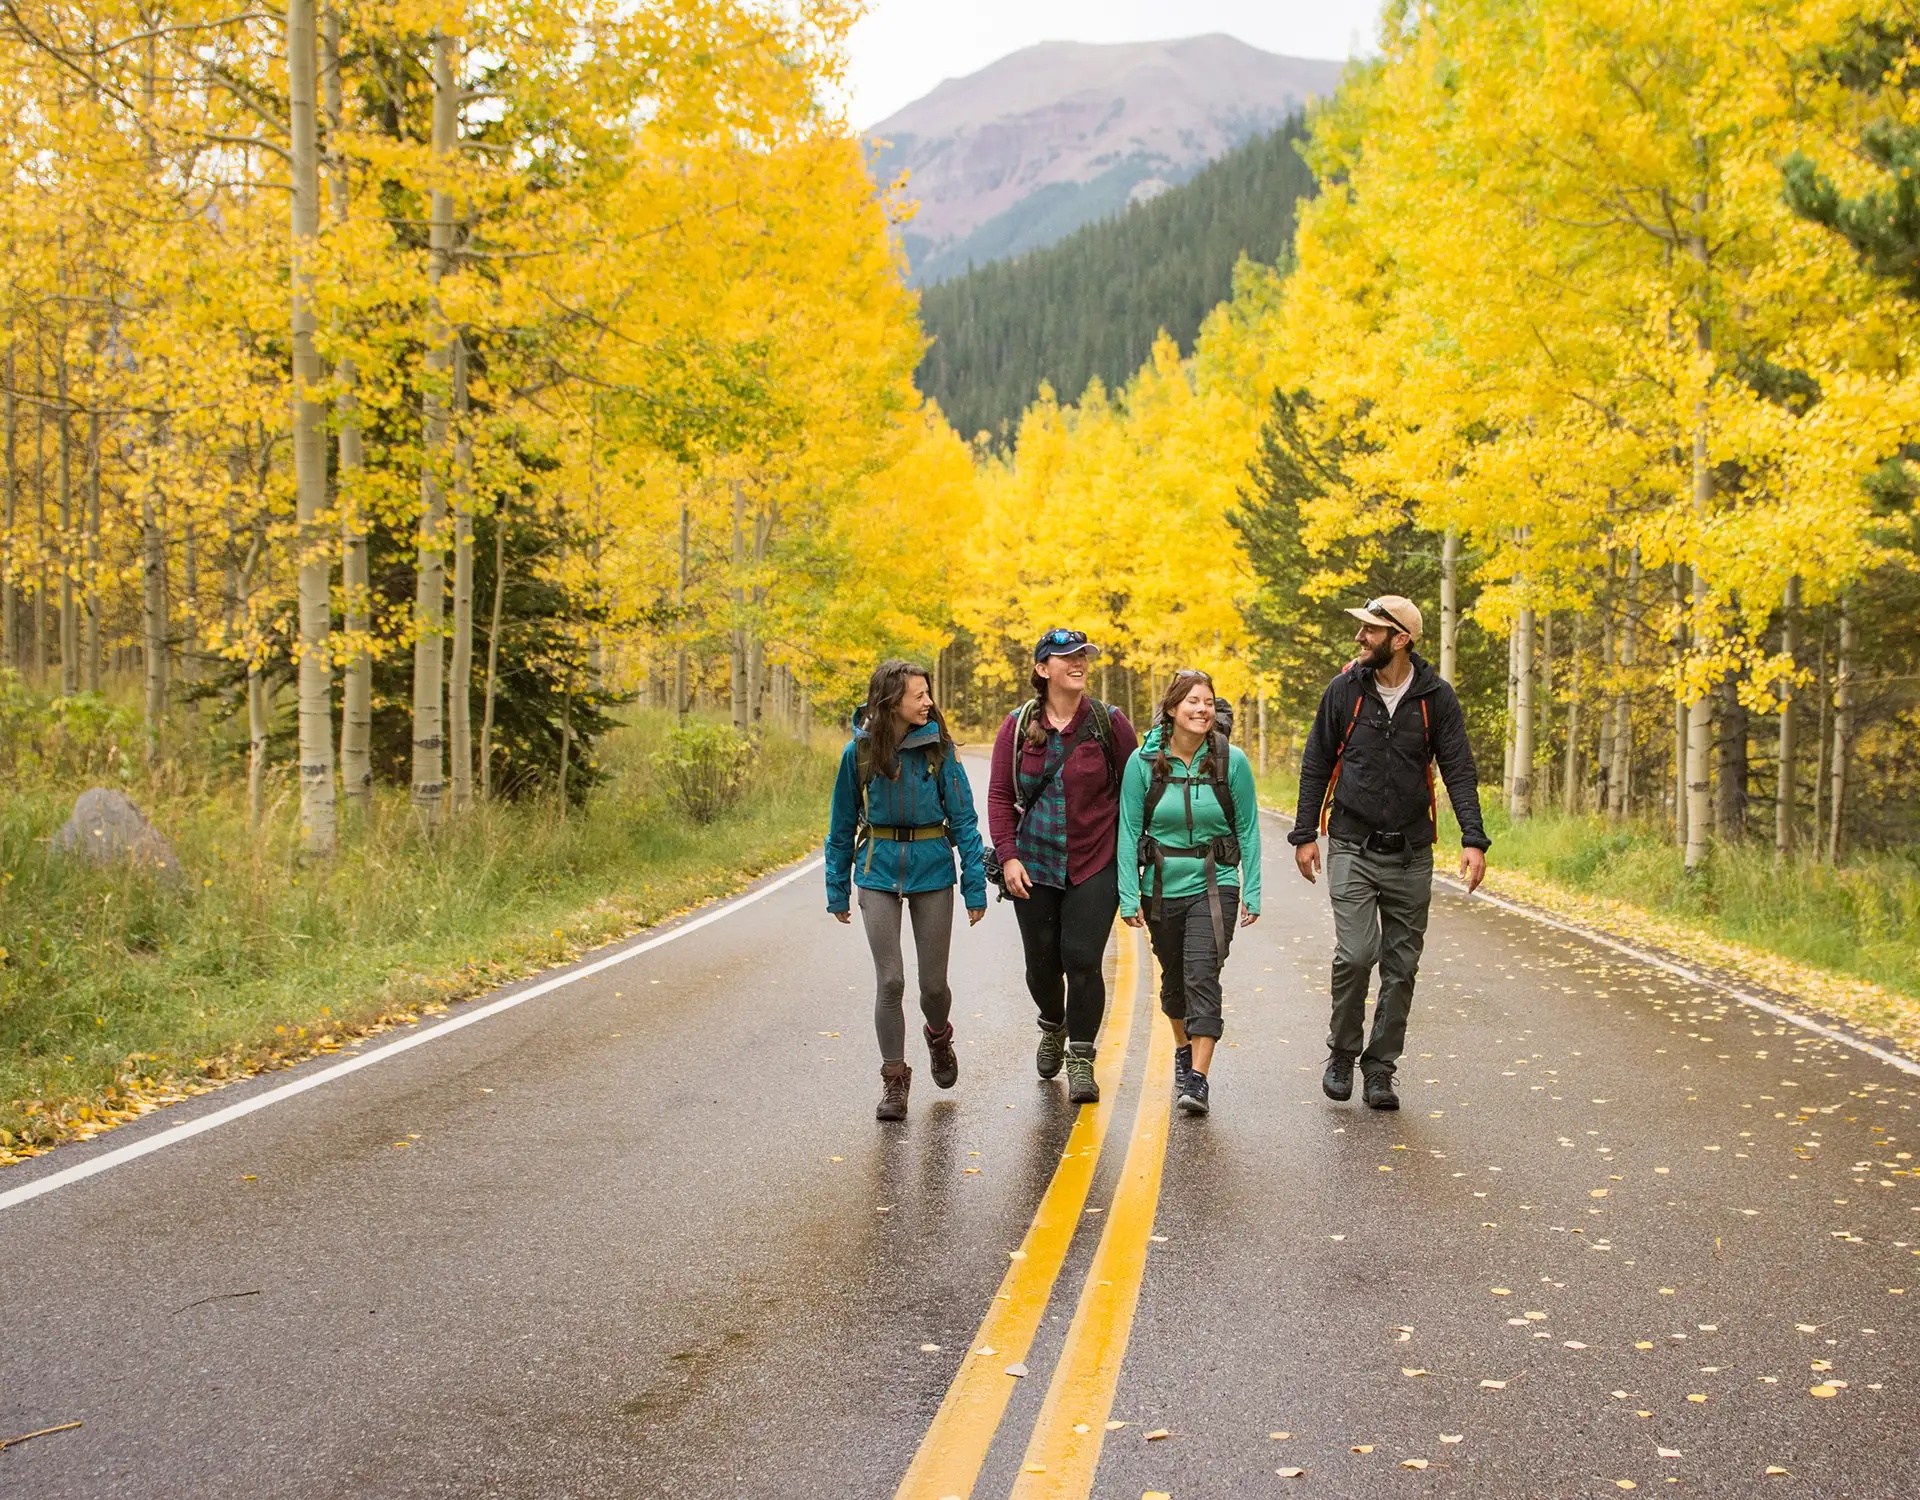 Group of four friends hiking along road with yellow autumn trees